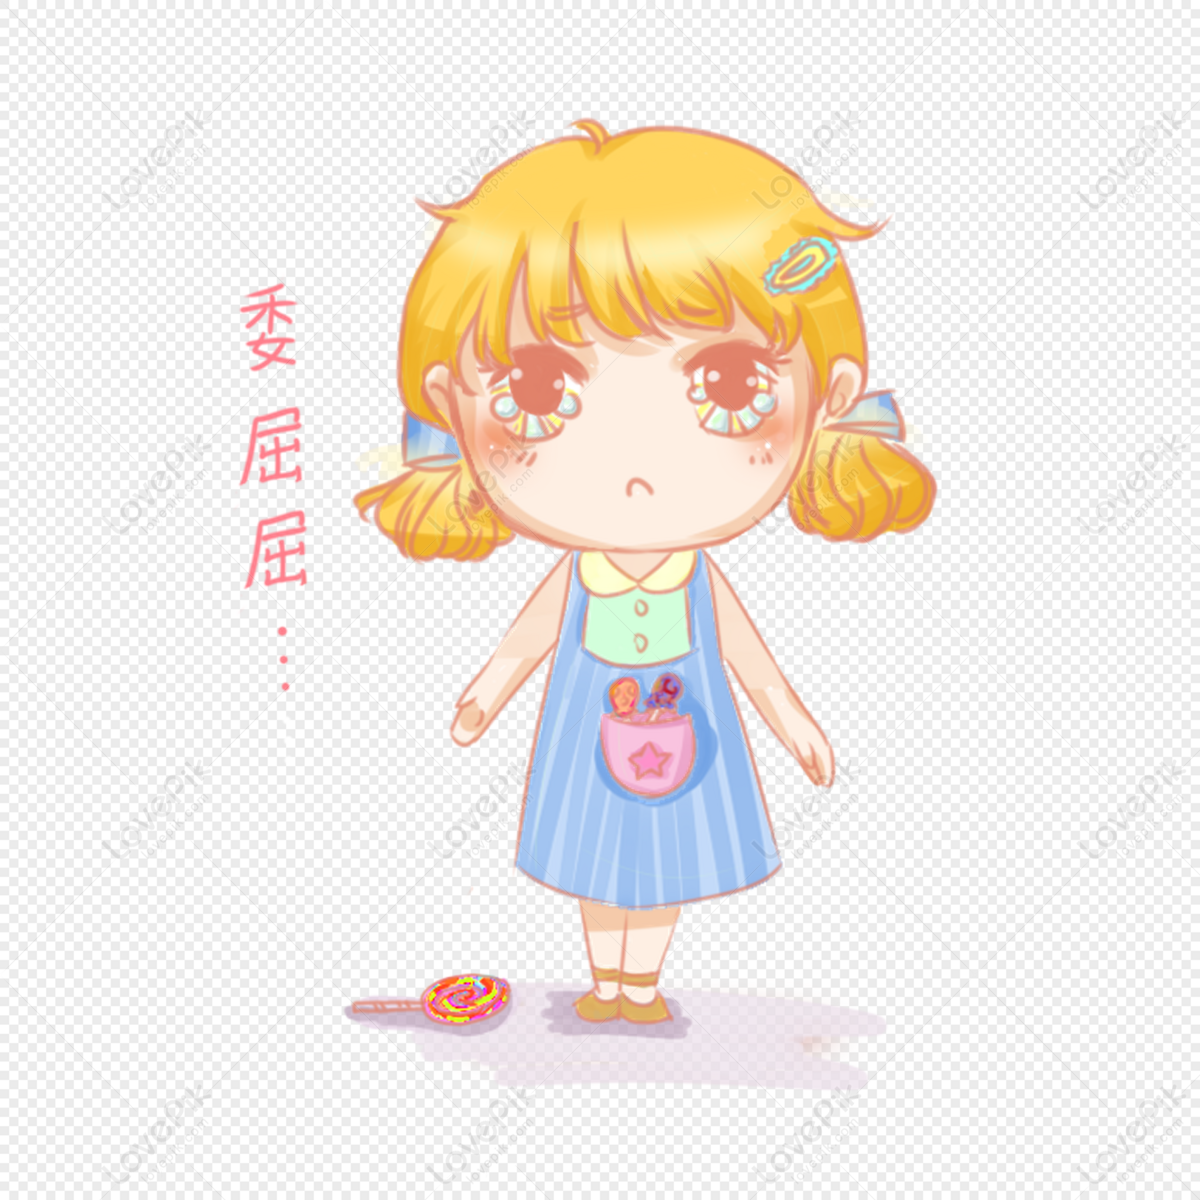 Cartoon Blond Hair Girl Grievance Expression PNG Transparent And Clipart  Image For Free Download - Lovepik | 401550346